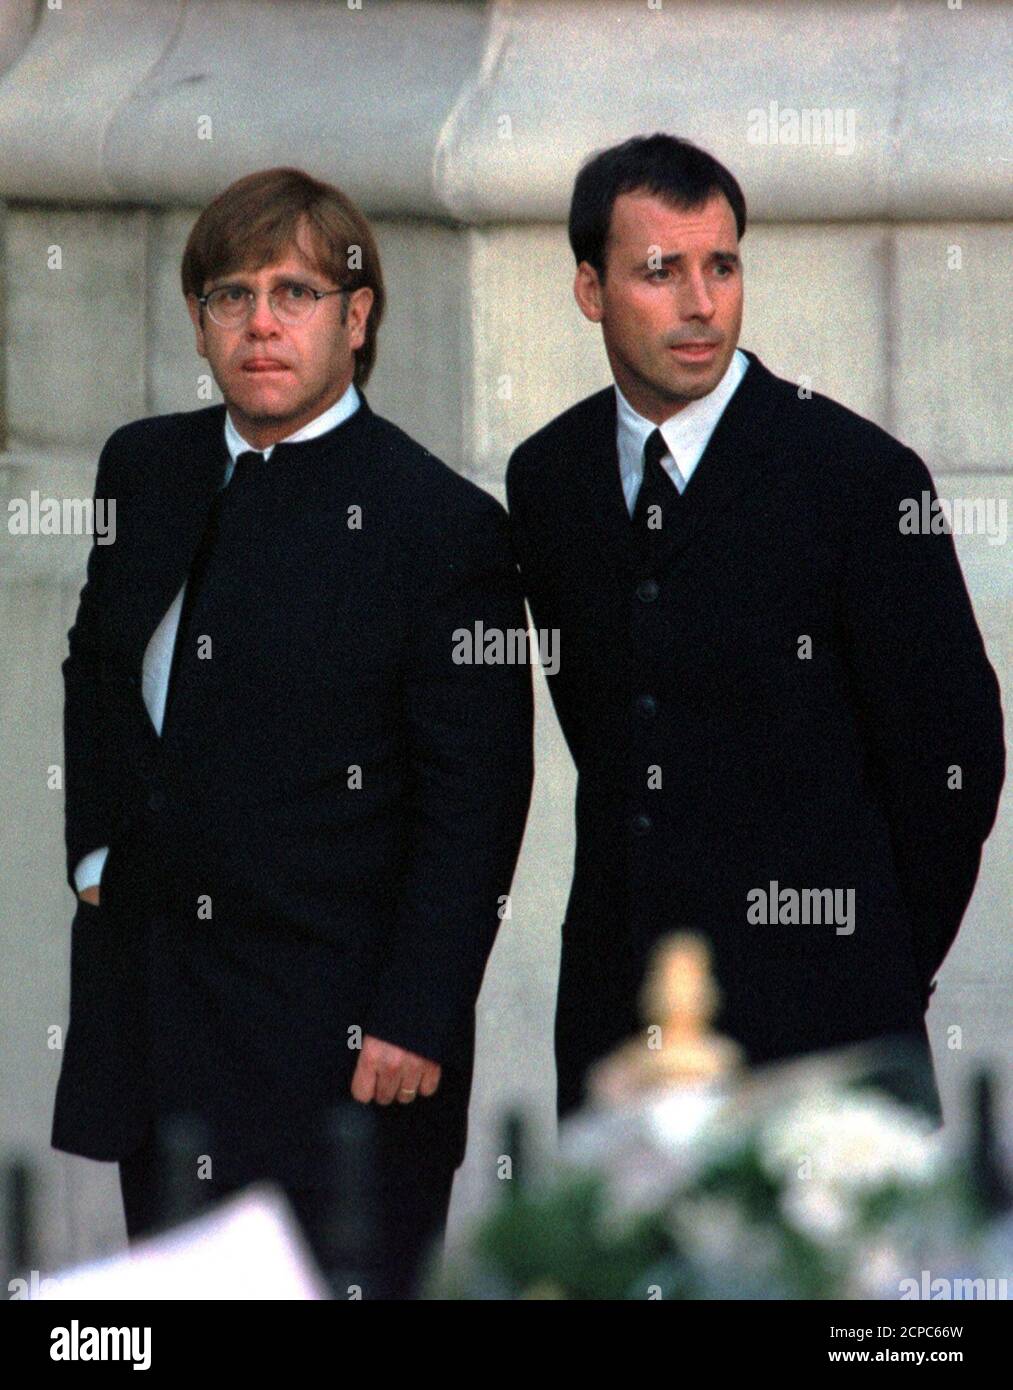 Pop singer Elton John (L), accompanied by companion David Furnish, arrives  at Westminster Abbey for the funeral service for Diana, Princess of Wales,  September 6. John sang a specially re-written version of